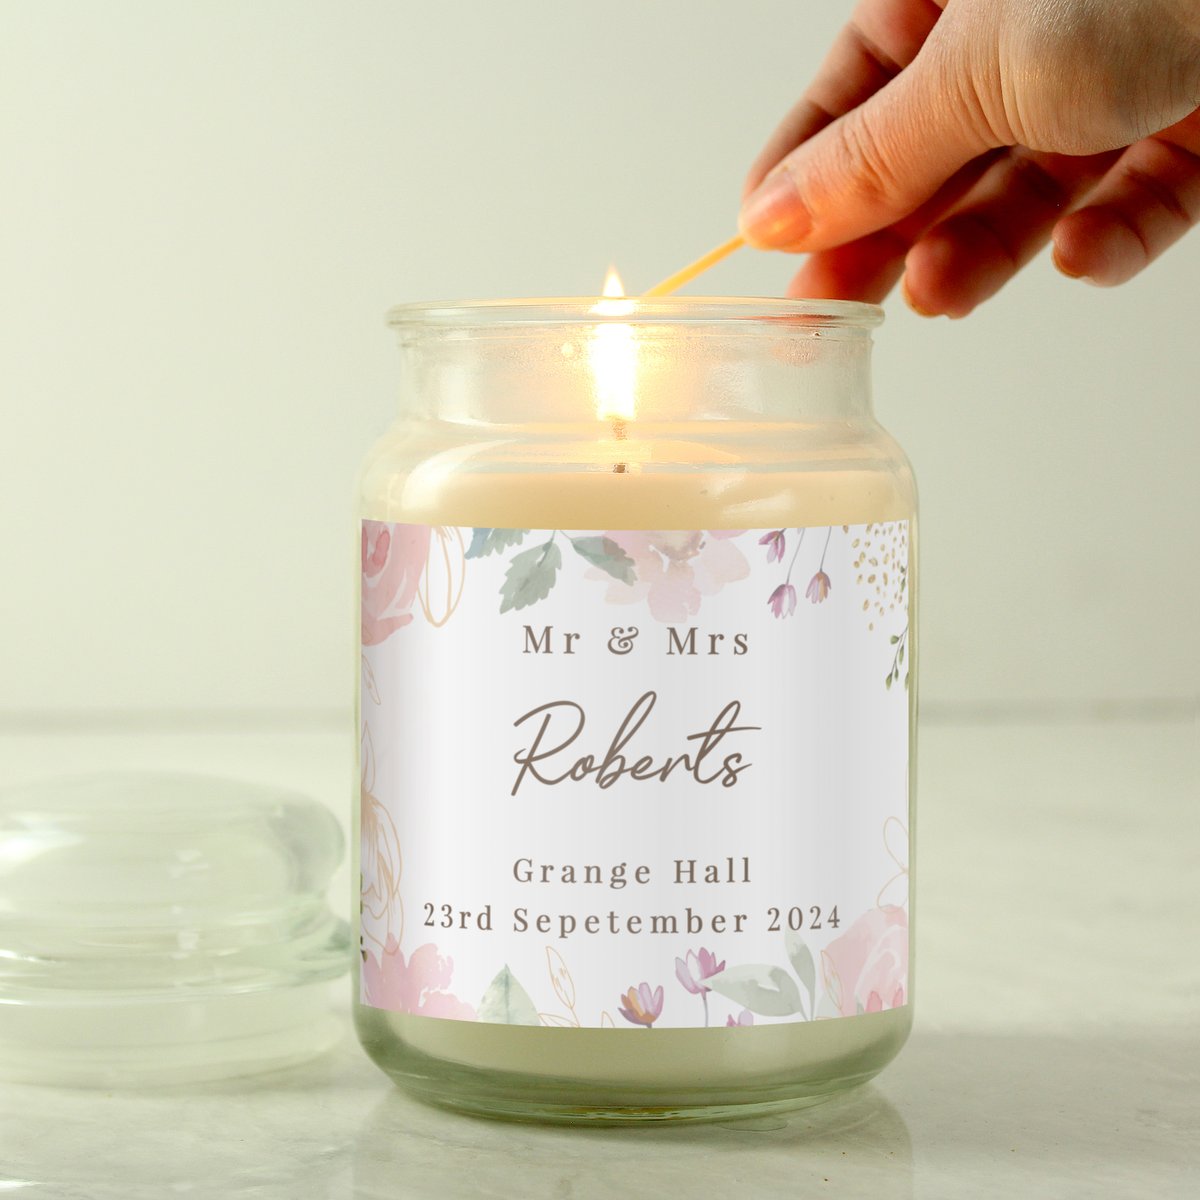 Personalised with any words over 3 lines on the pretty, floral label, this vanilla scented jar candle would make a lovely anniversary or wedding gift idea lilybluestore.com/products/perso…

#MHHSBD #candle #shopindie #scentedcandle #giftideas